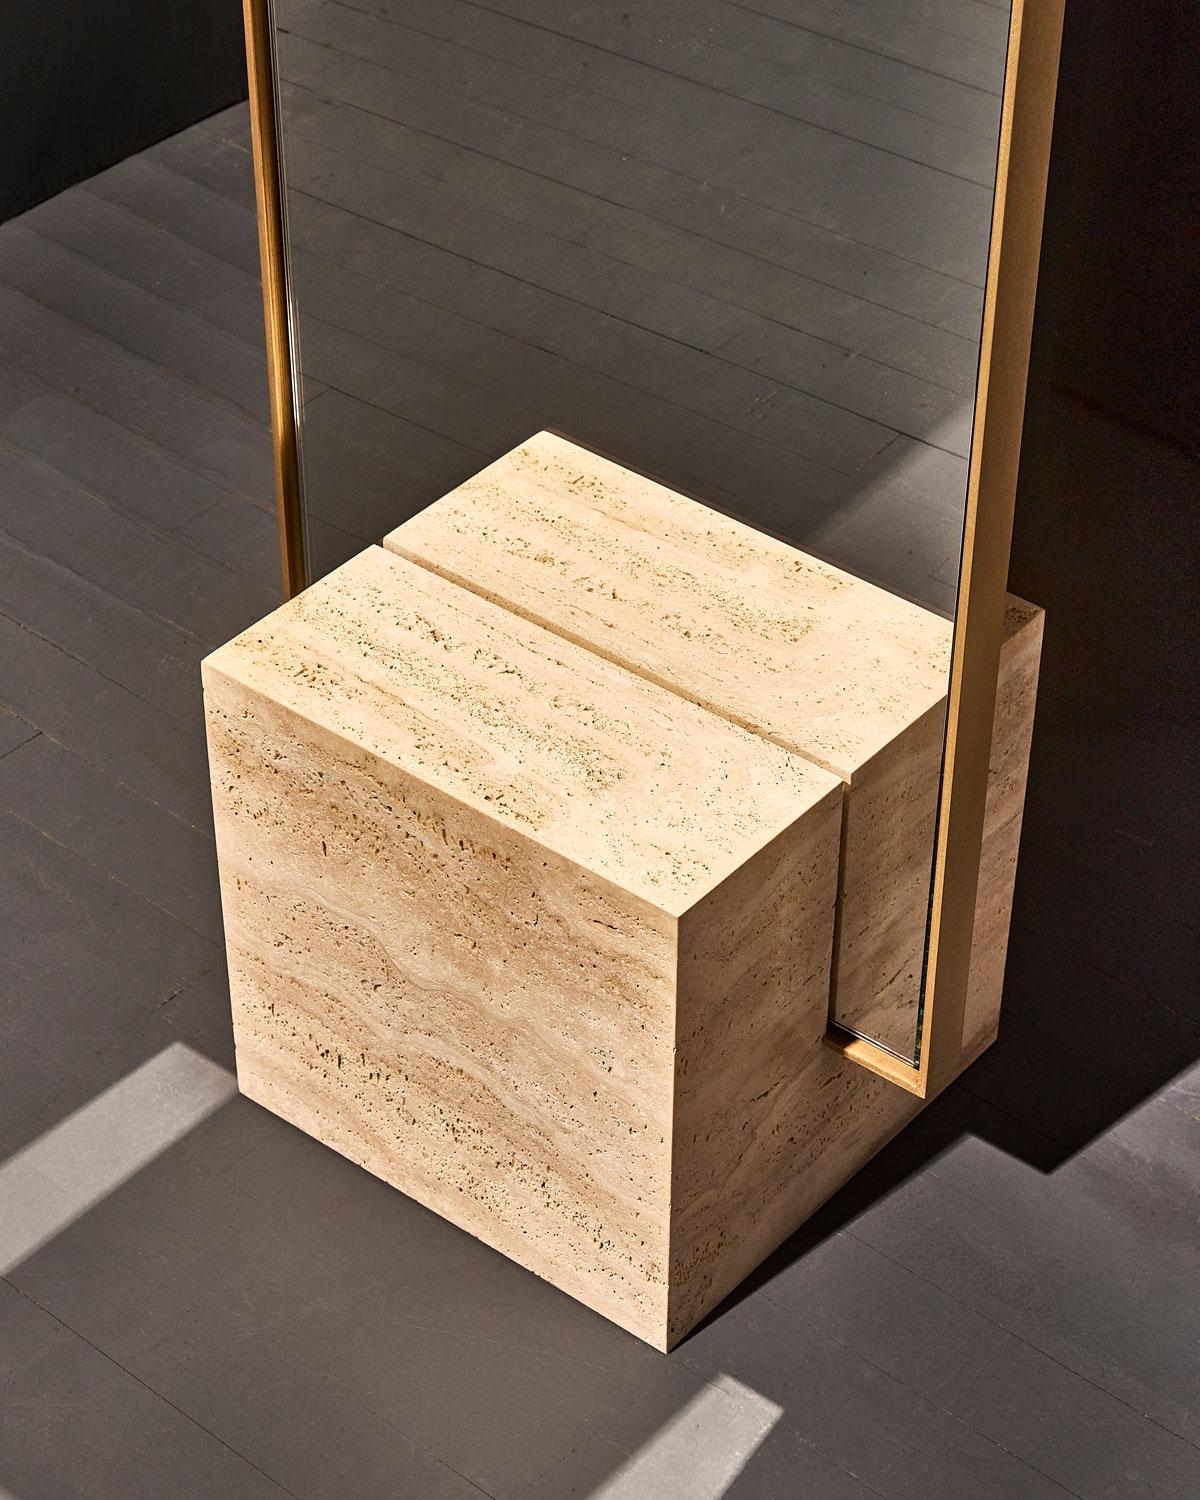 The coexist standing mirror consists of a honed travertine cube base, brushed brass mirror frame, and finished backing. The mirror can stand alone or be set near a wall. 

The brass framed mirror fits into a rich stone cube base with precision. The